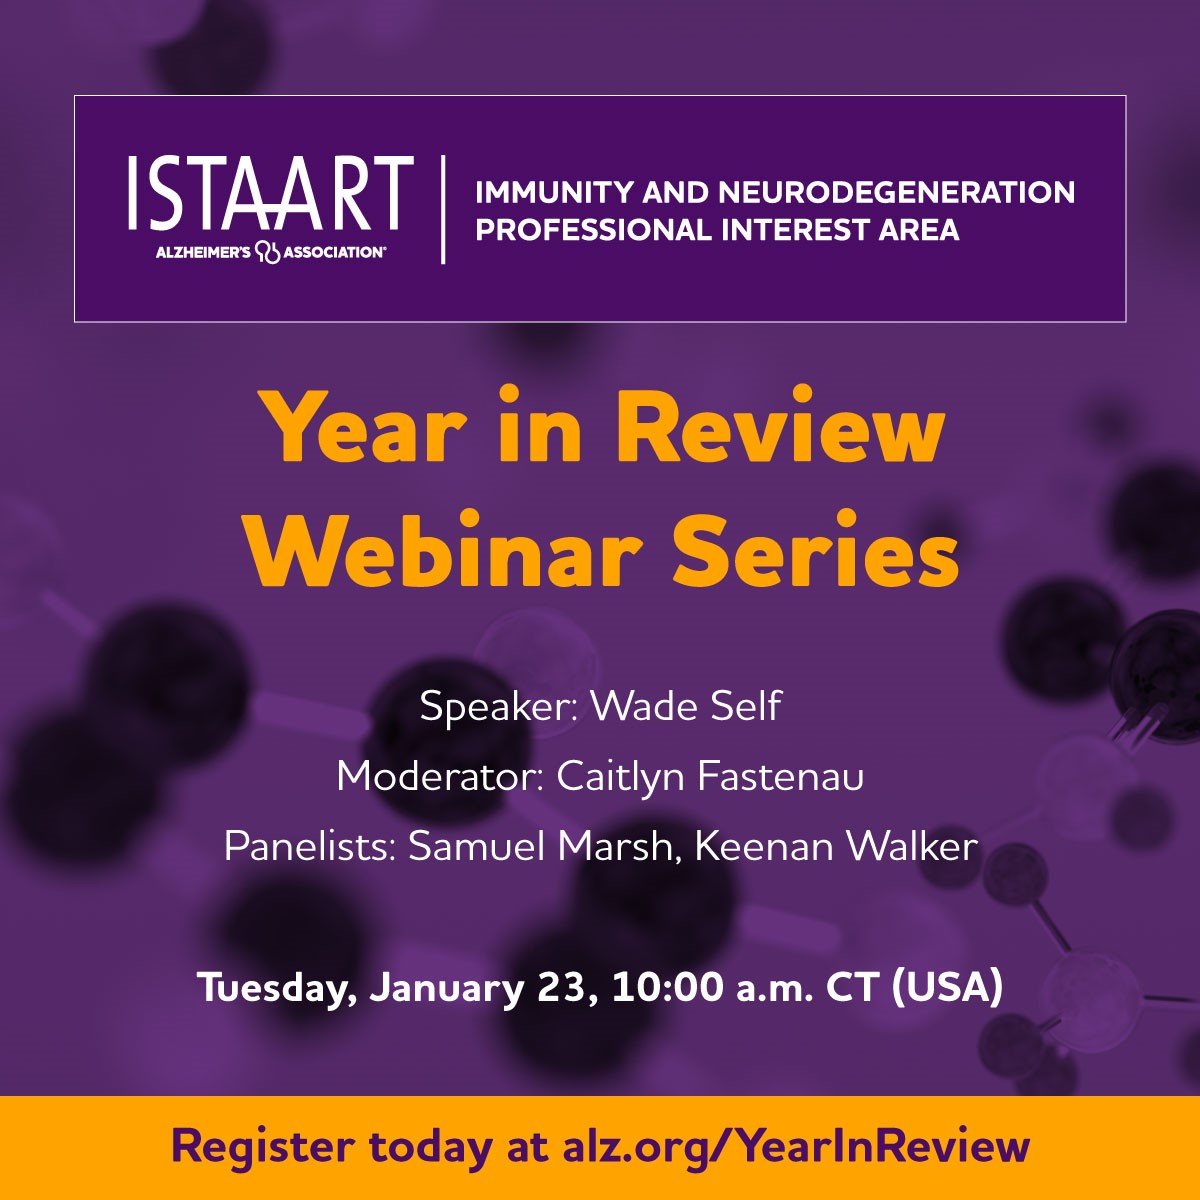 2023 was a big year for scientific advances in Immunity & Neurodegeneration. Join the @ISTAART @ImmunityPIA on January 23rd to hear all about it! Featuring moderation by Hopp Lab PhD candidate @CaitlynFastenau. Register here: alz.org/YearInReview